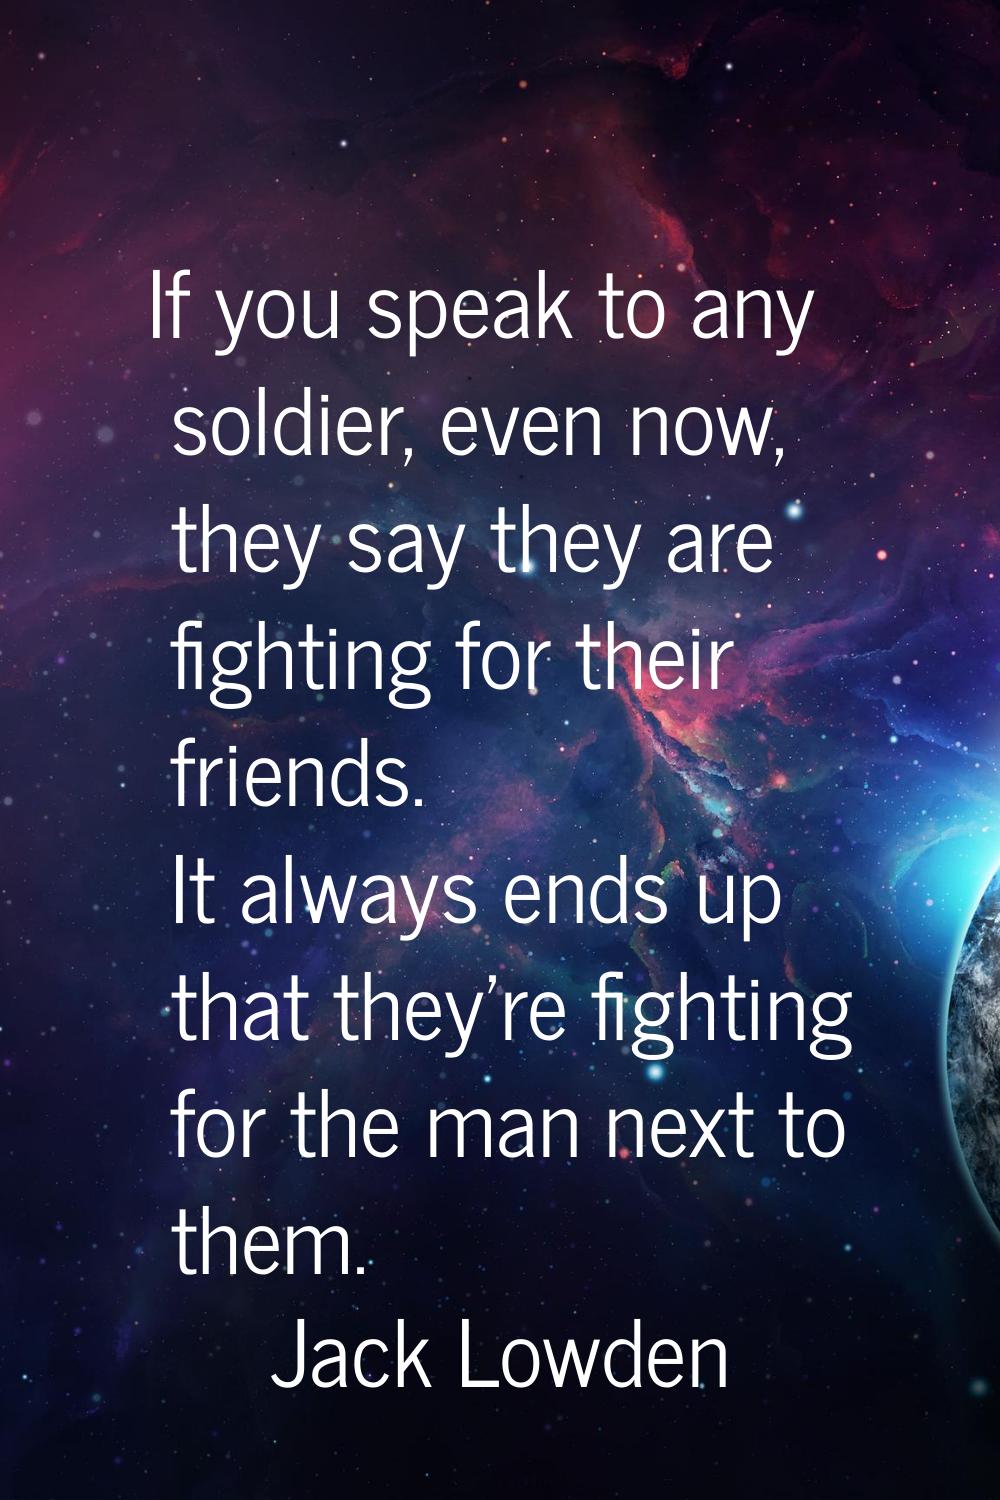 If you speak to any soldier, even now, they say they are fighting for their friends. It always ends